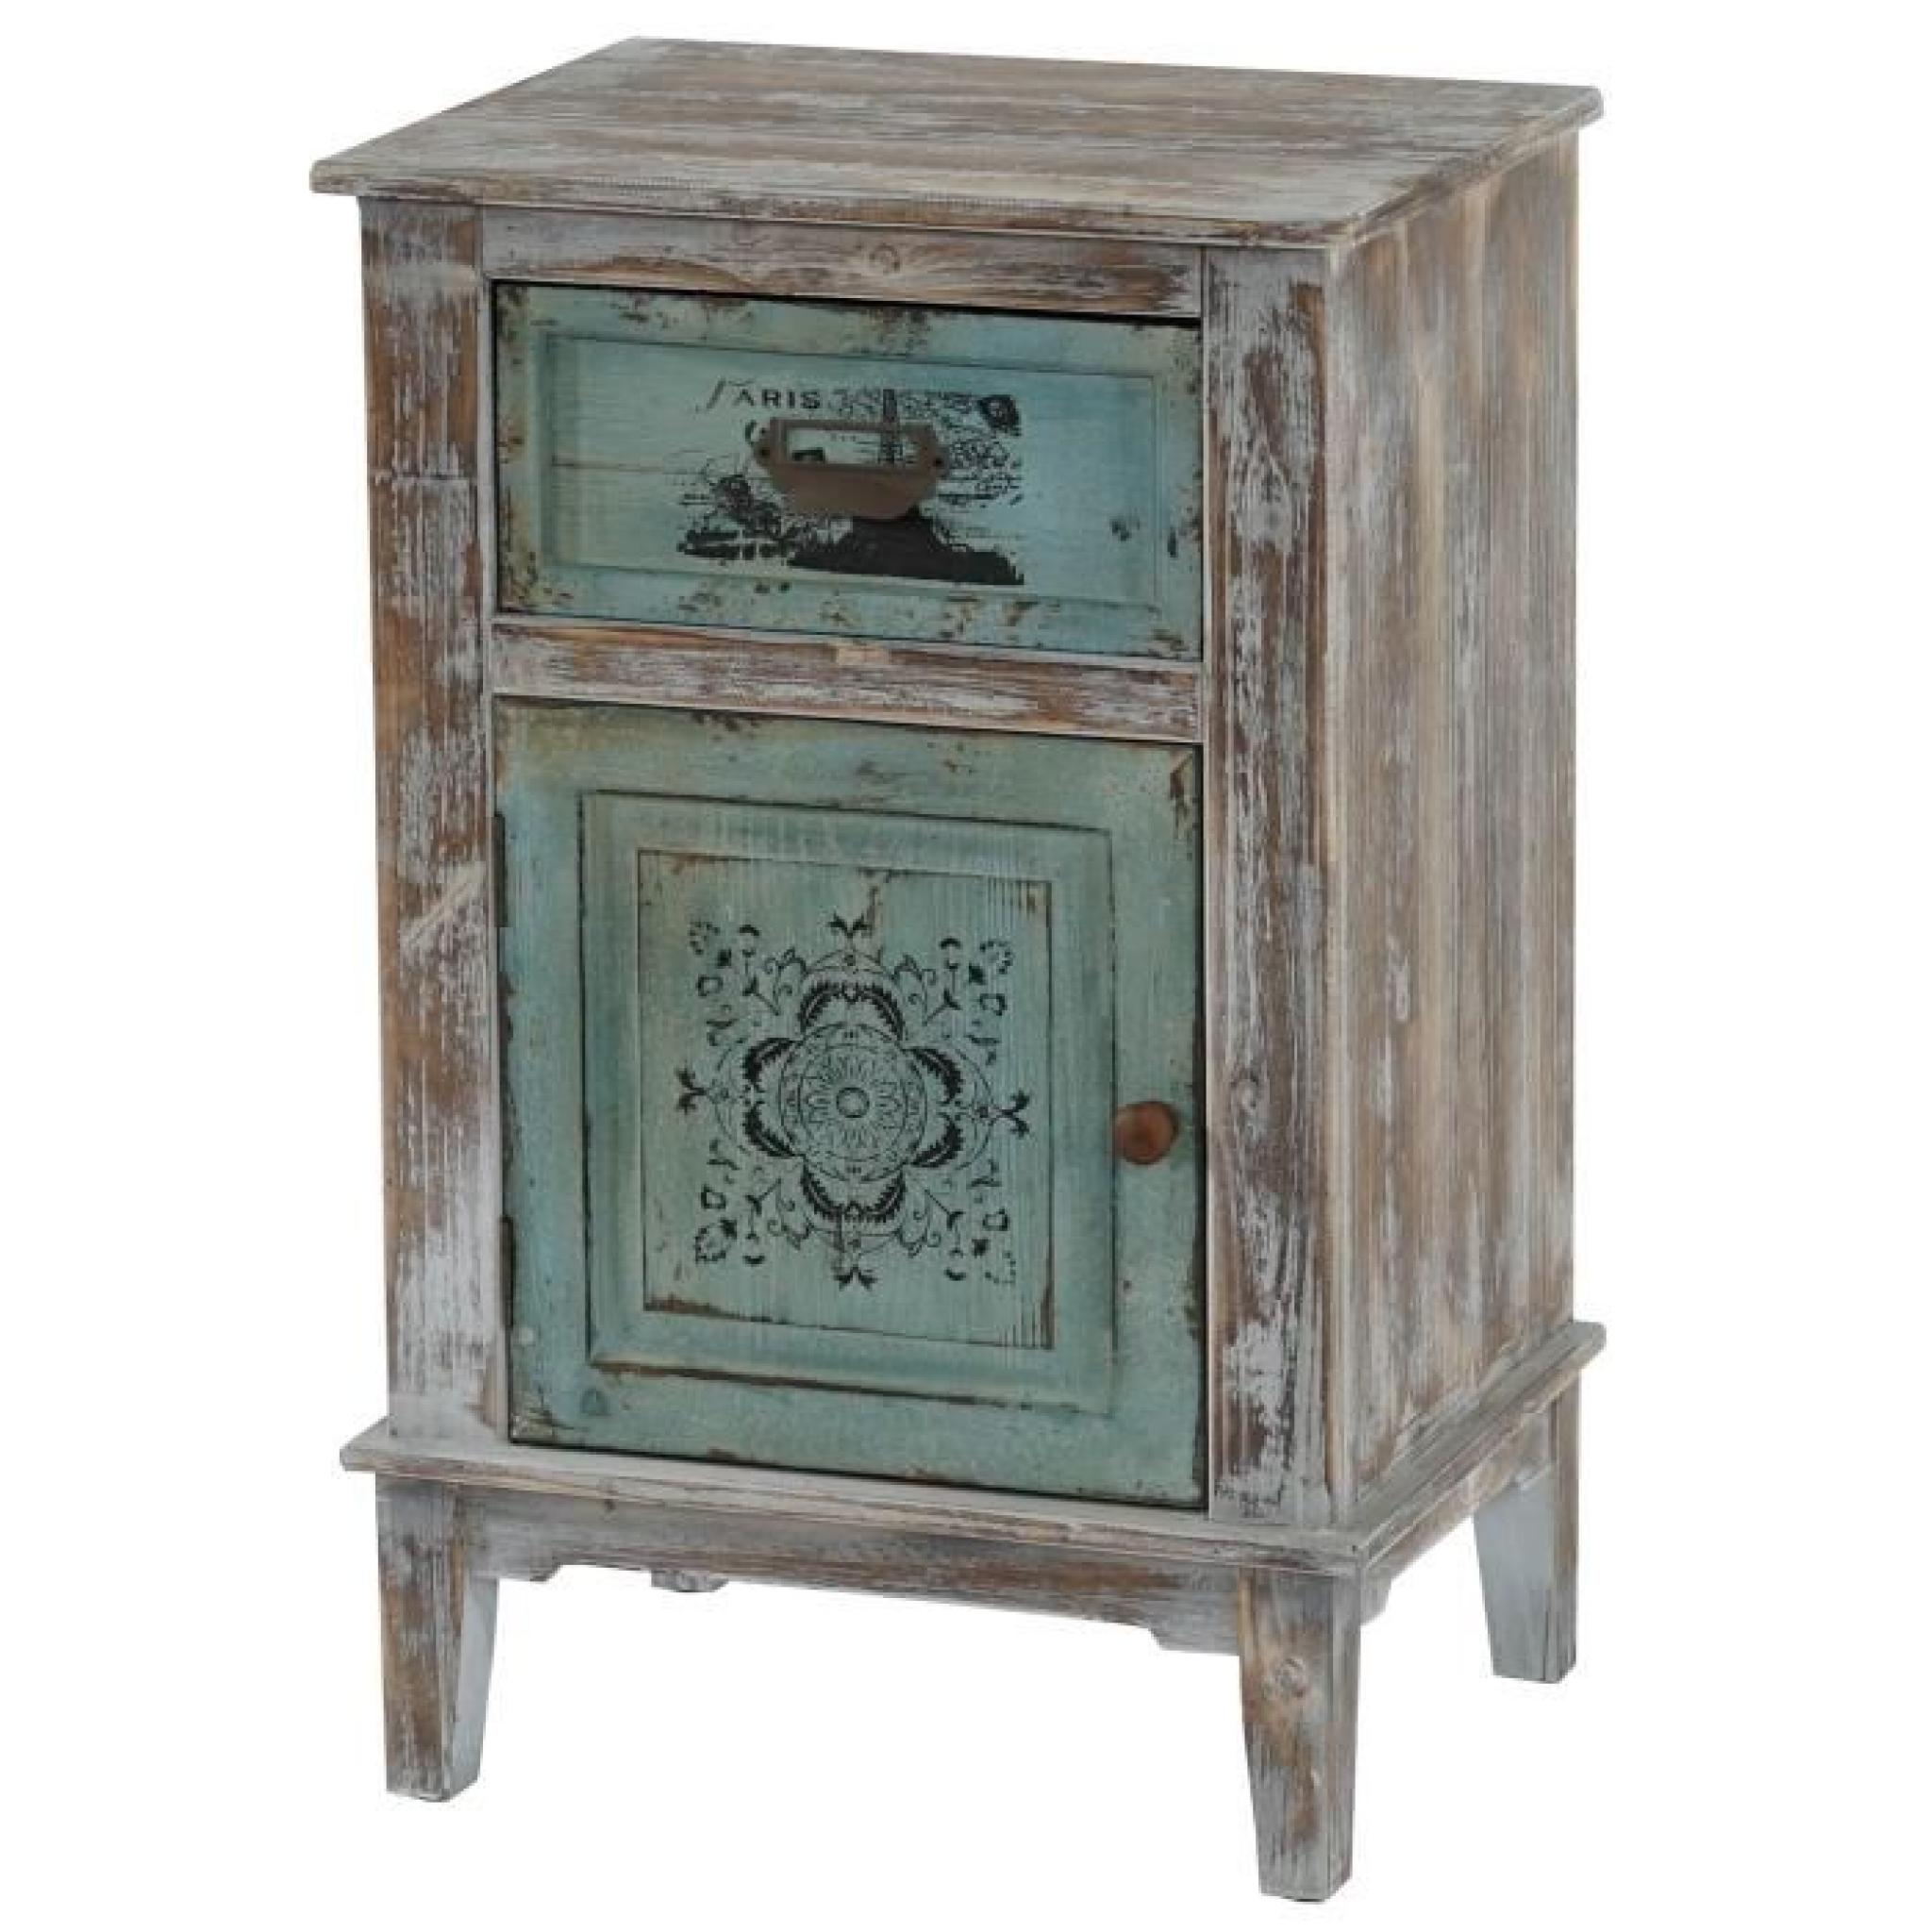 Commode Murcia armoire table d'appoint, vintage, shabby chic,75x48x36cm.